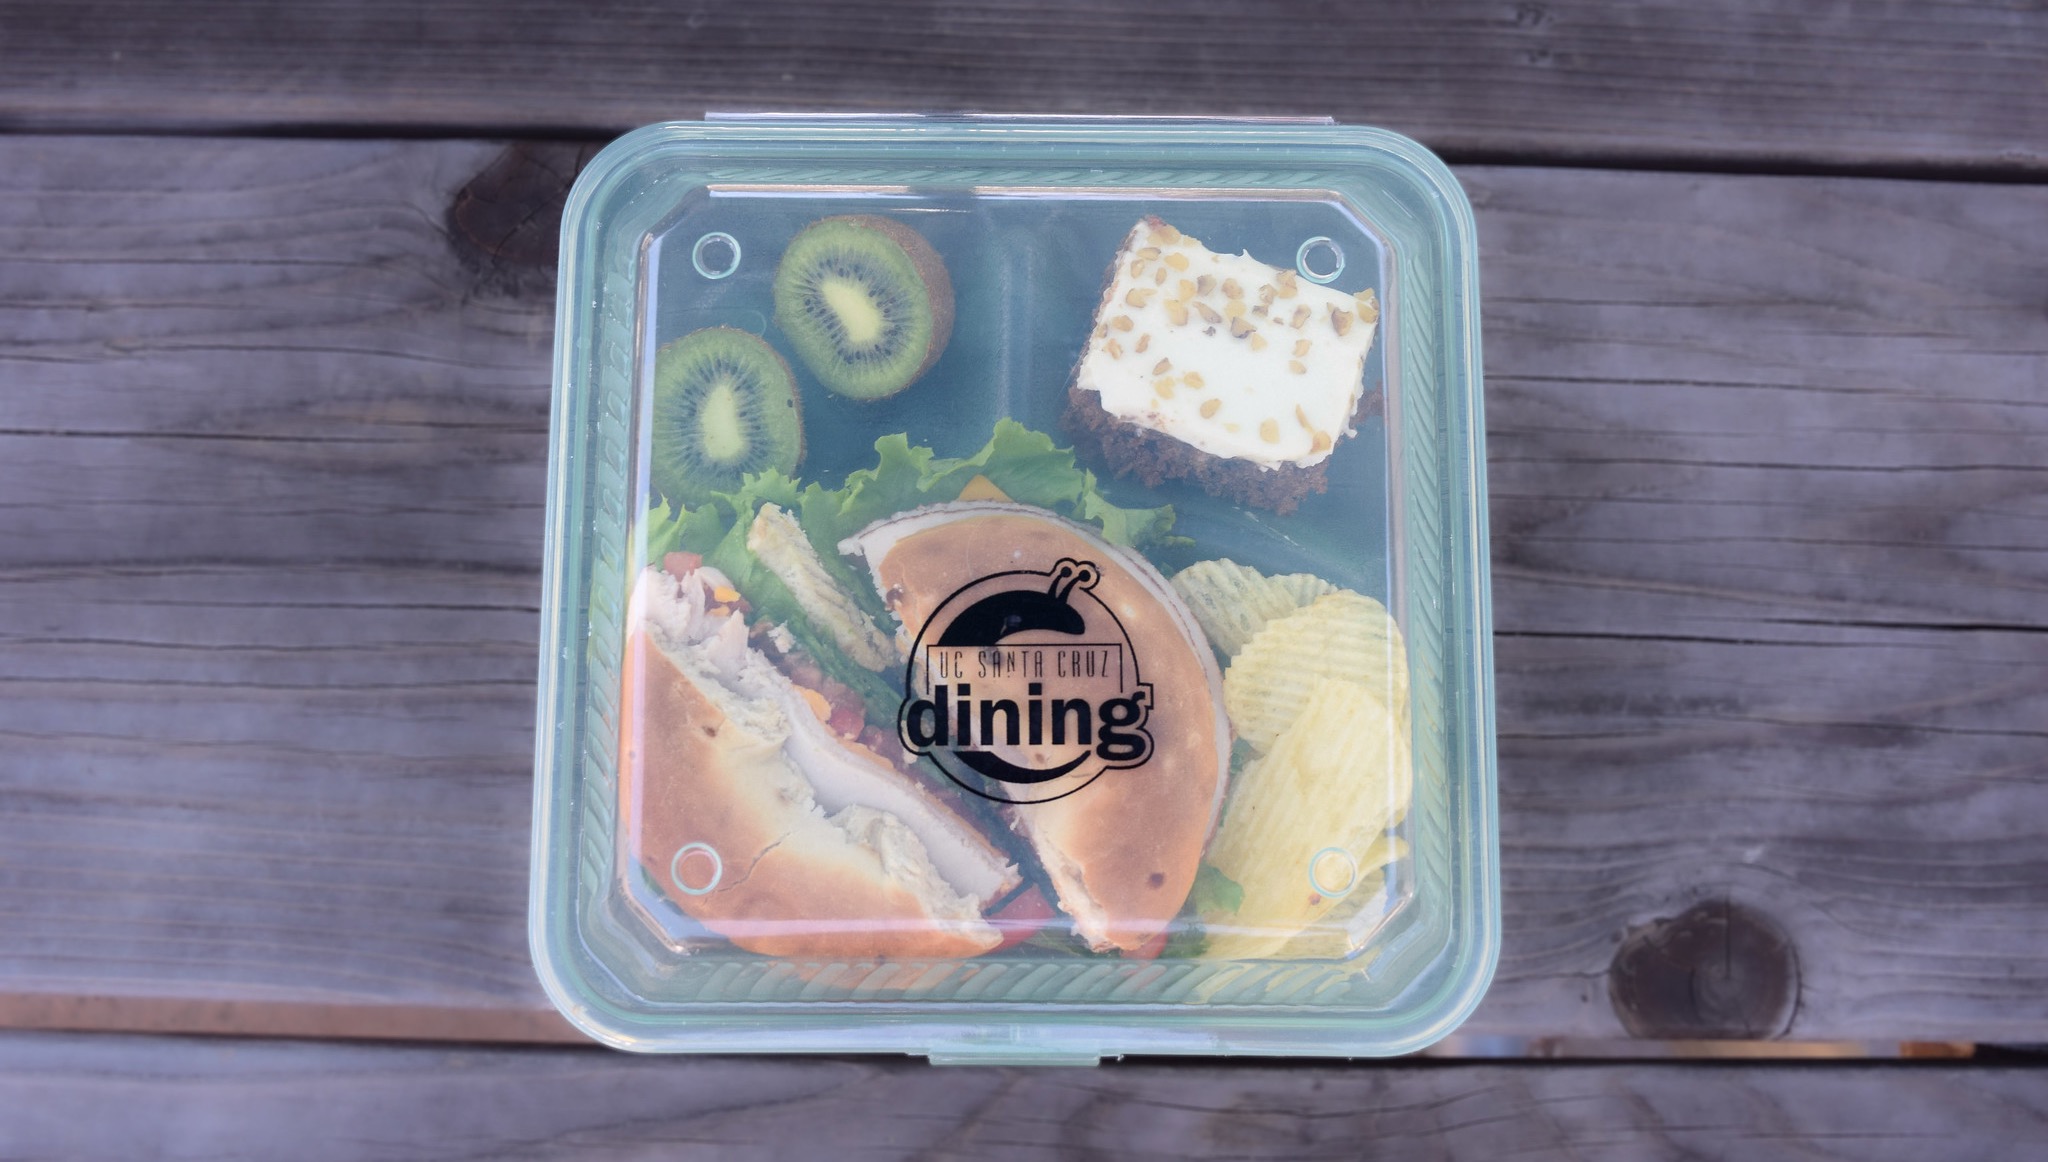 Dining halls switch to reusable to-go boxes